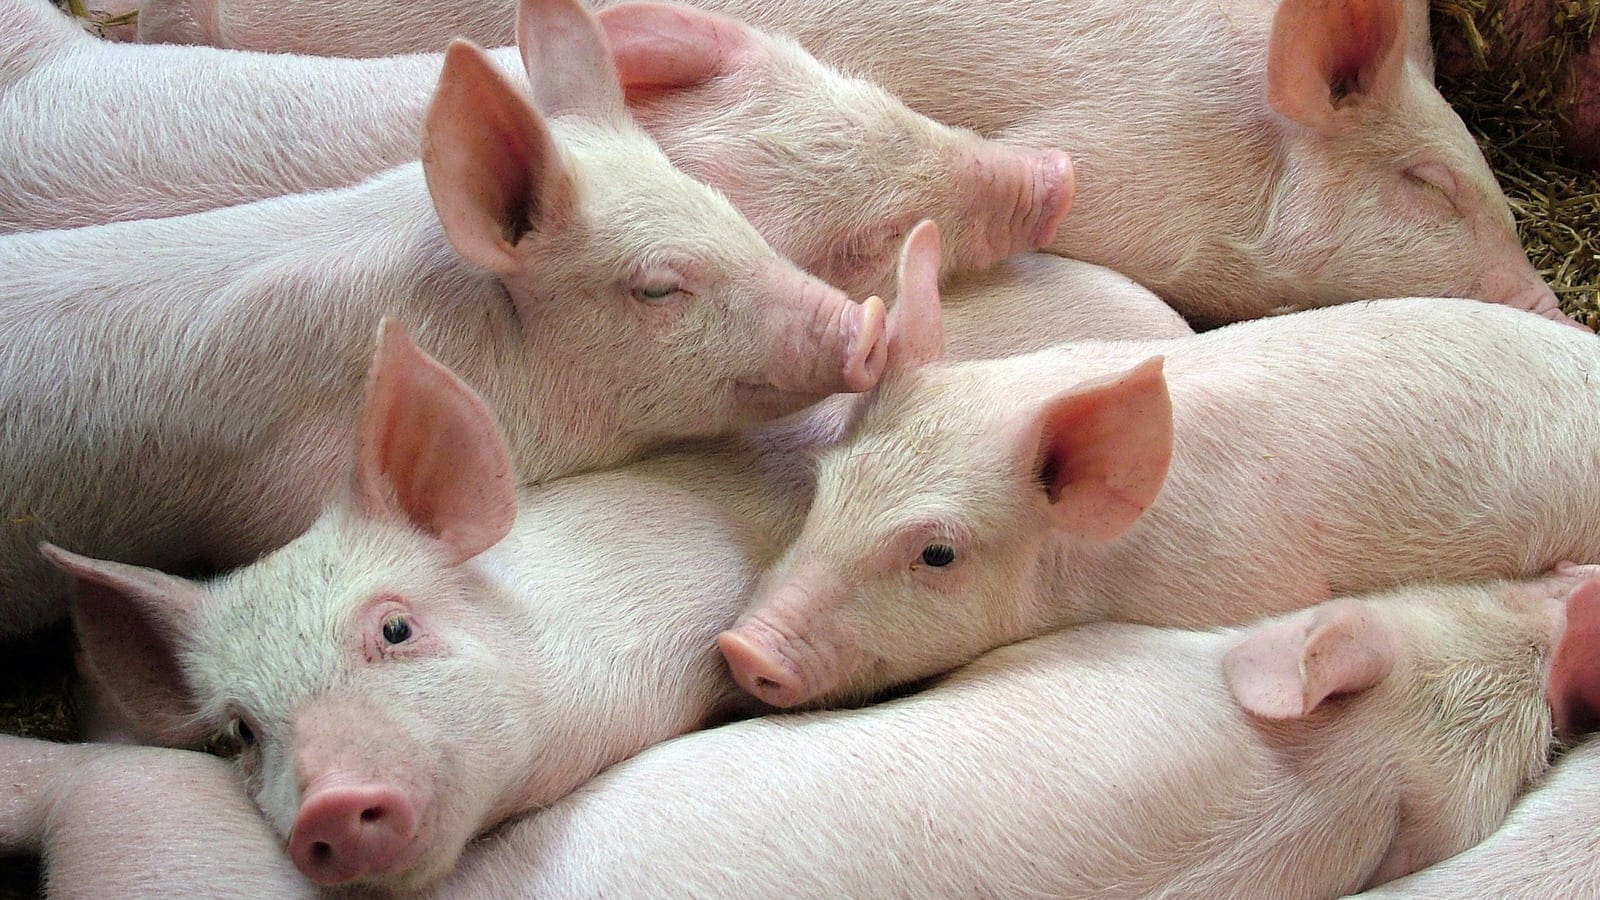 Tanzania imports 52,000 tonnes of pork annually, new data from Tapifa shows